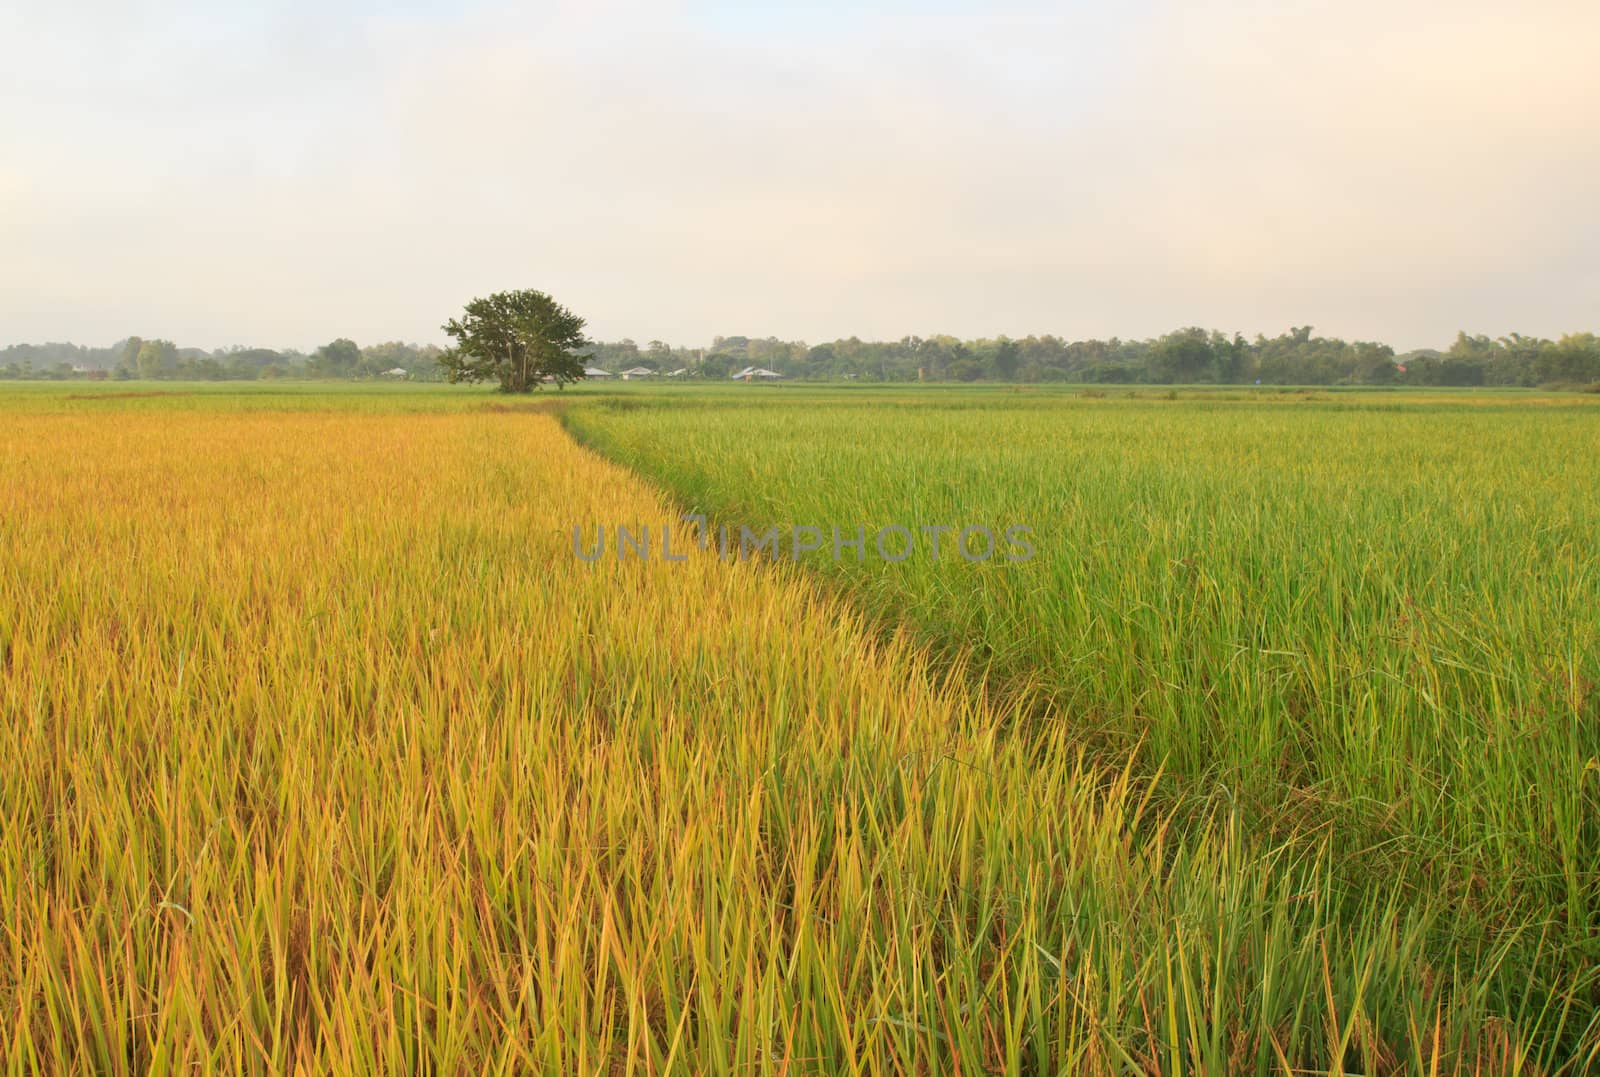 The beautiful landscape of rice fields in Thailand.